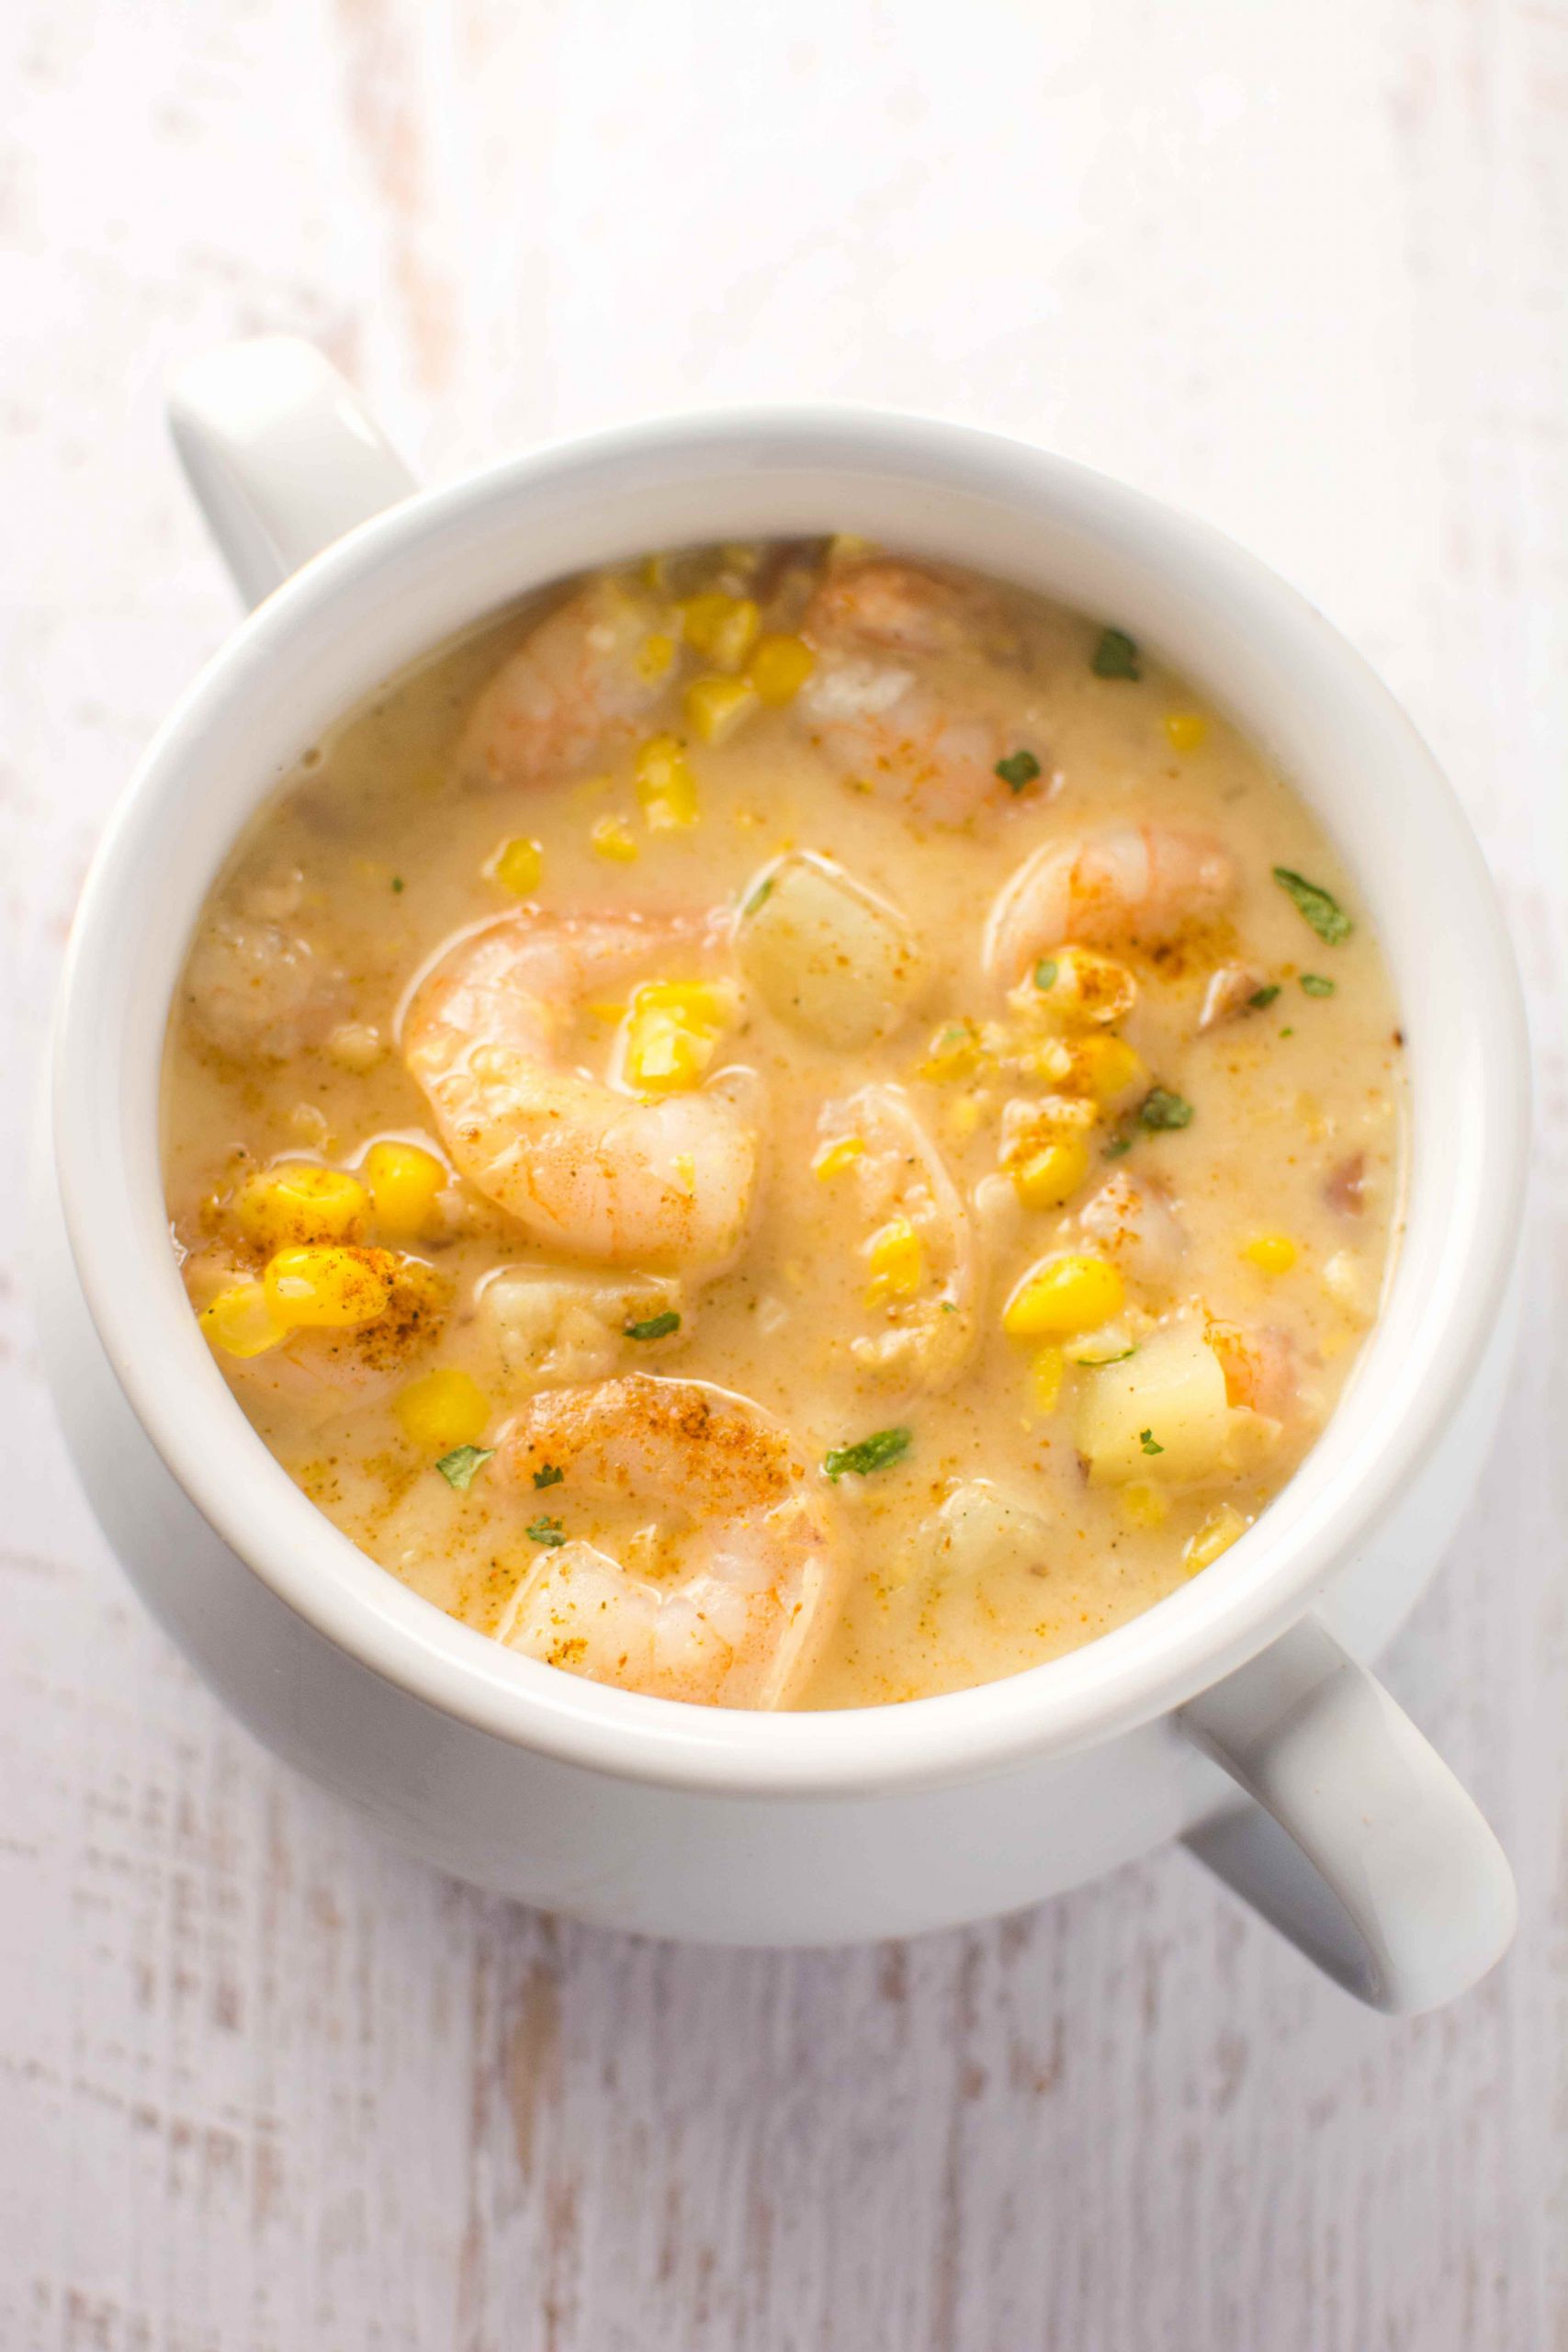 30 Best Seafood Chowder Crock Pot - Home, Family, Style and Art Ideas